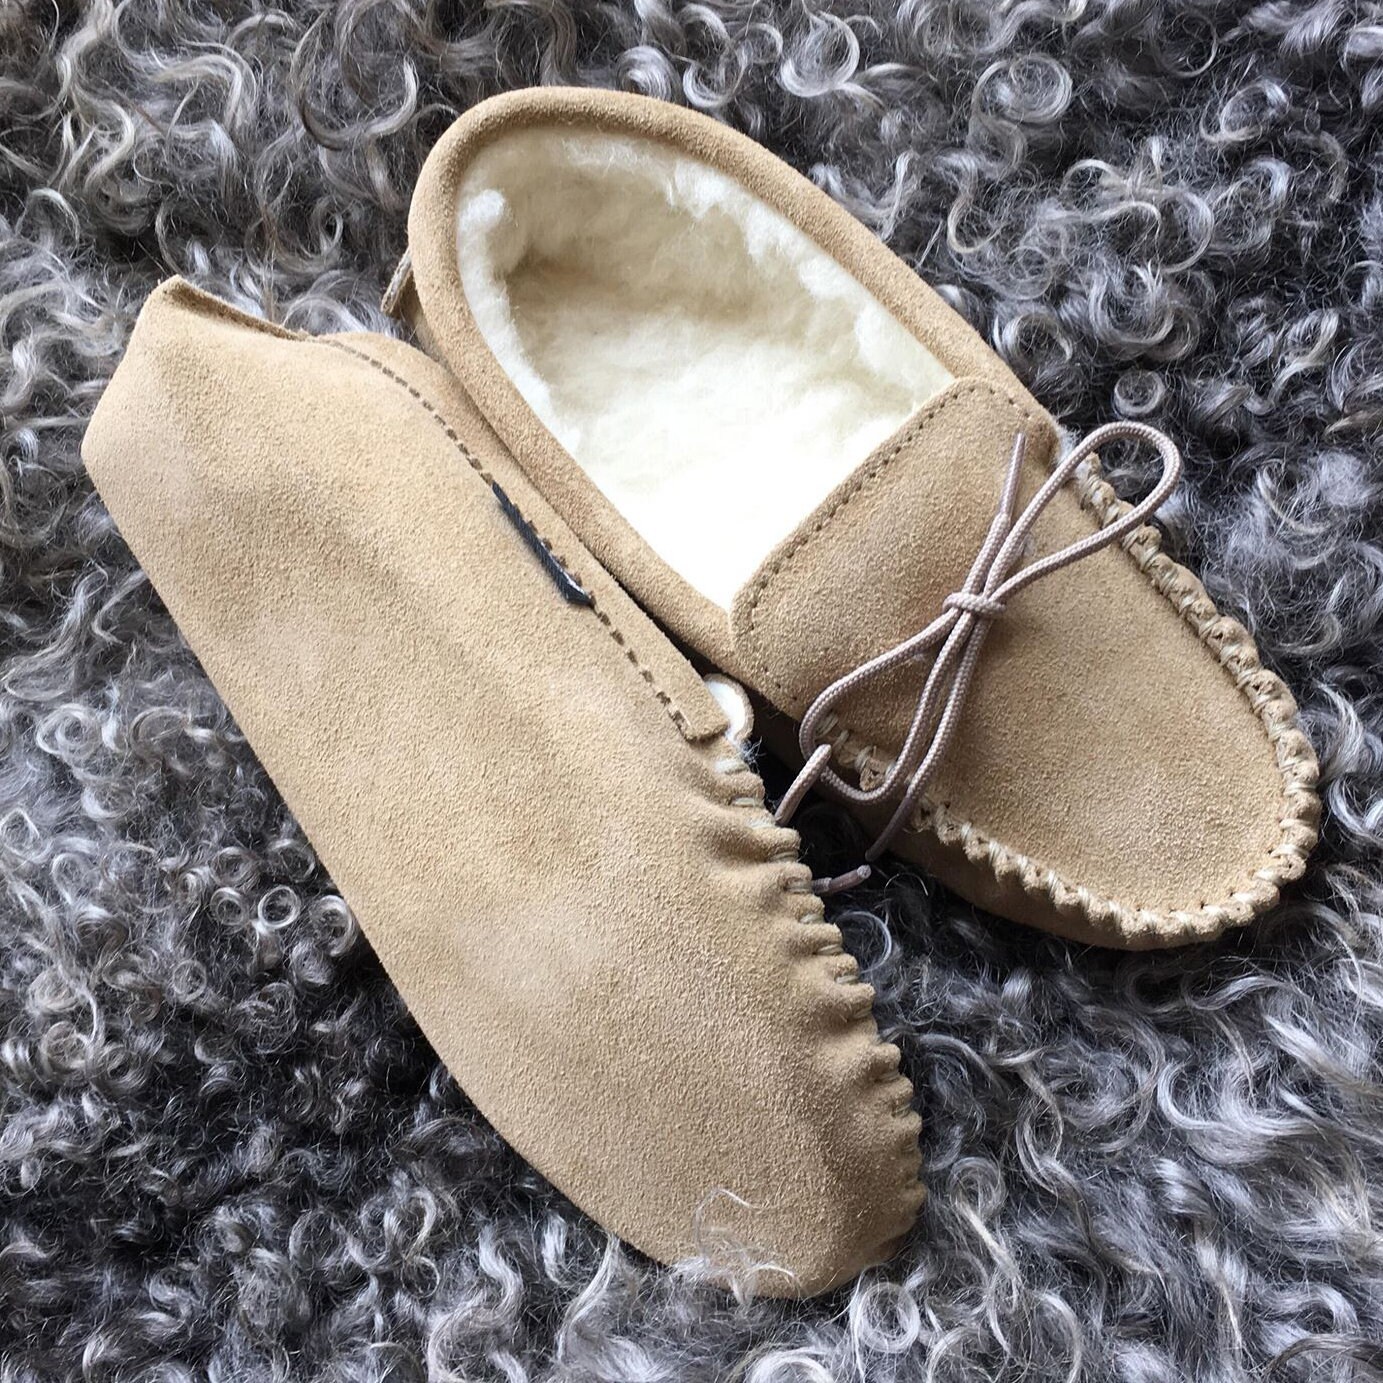 Sheepskin Baby Moccasin Slippers UK Made with Luxury Wool by Lambland 